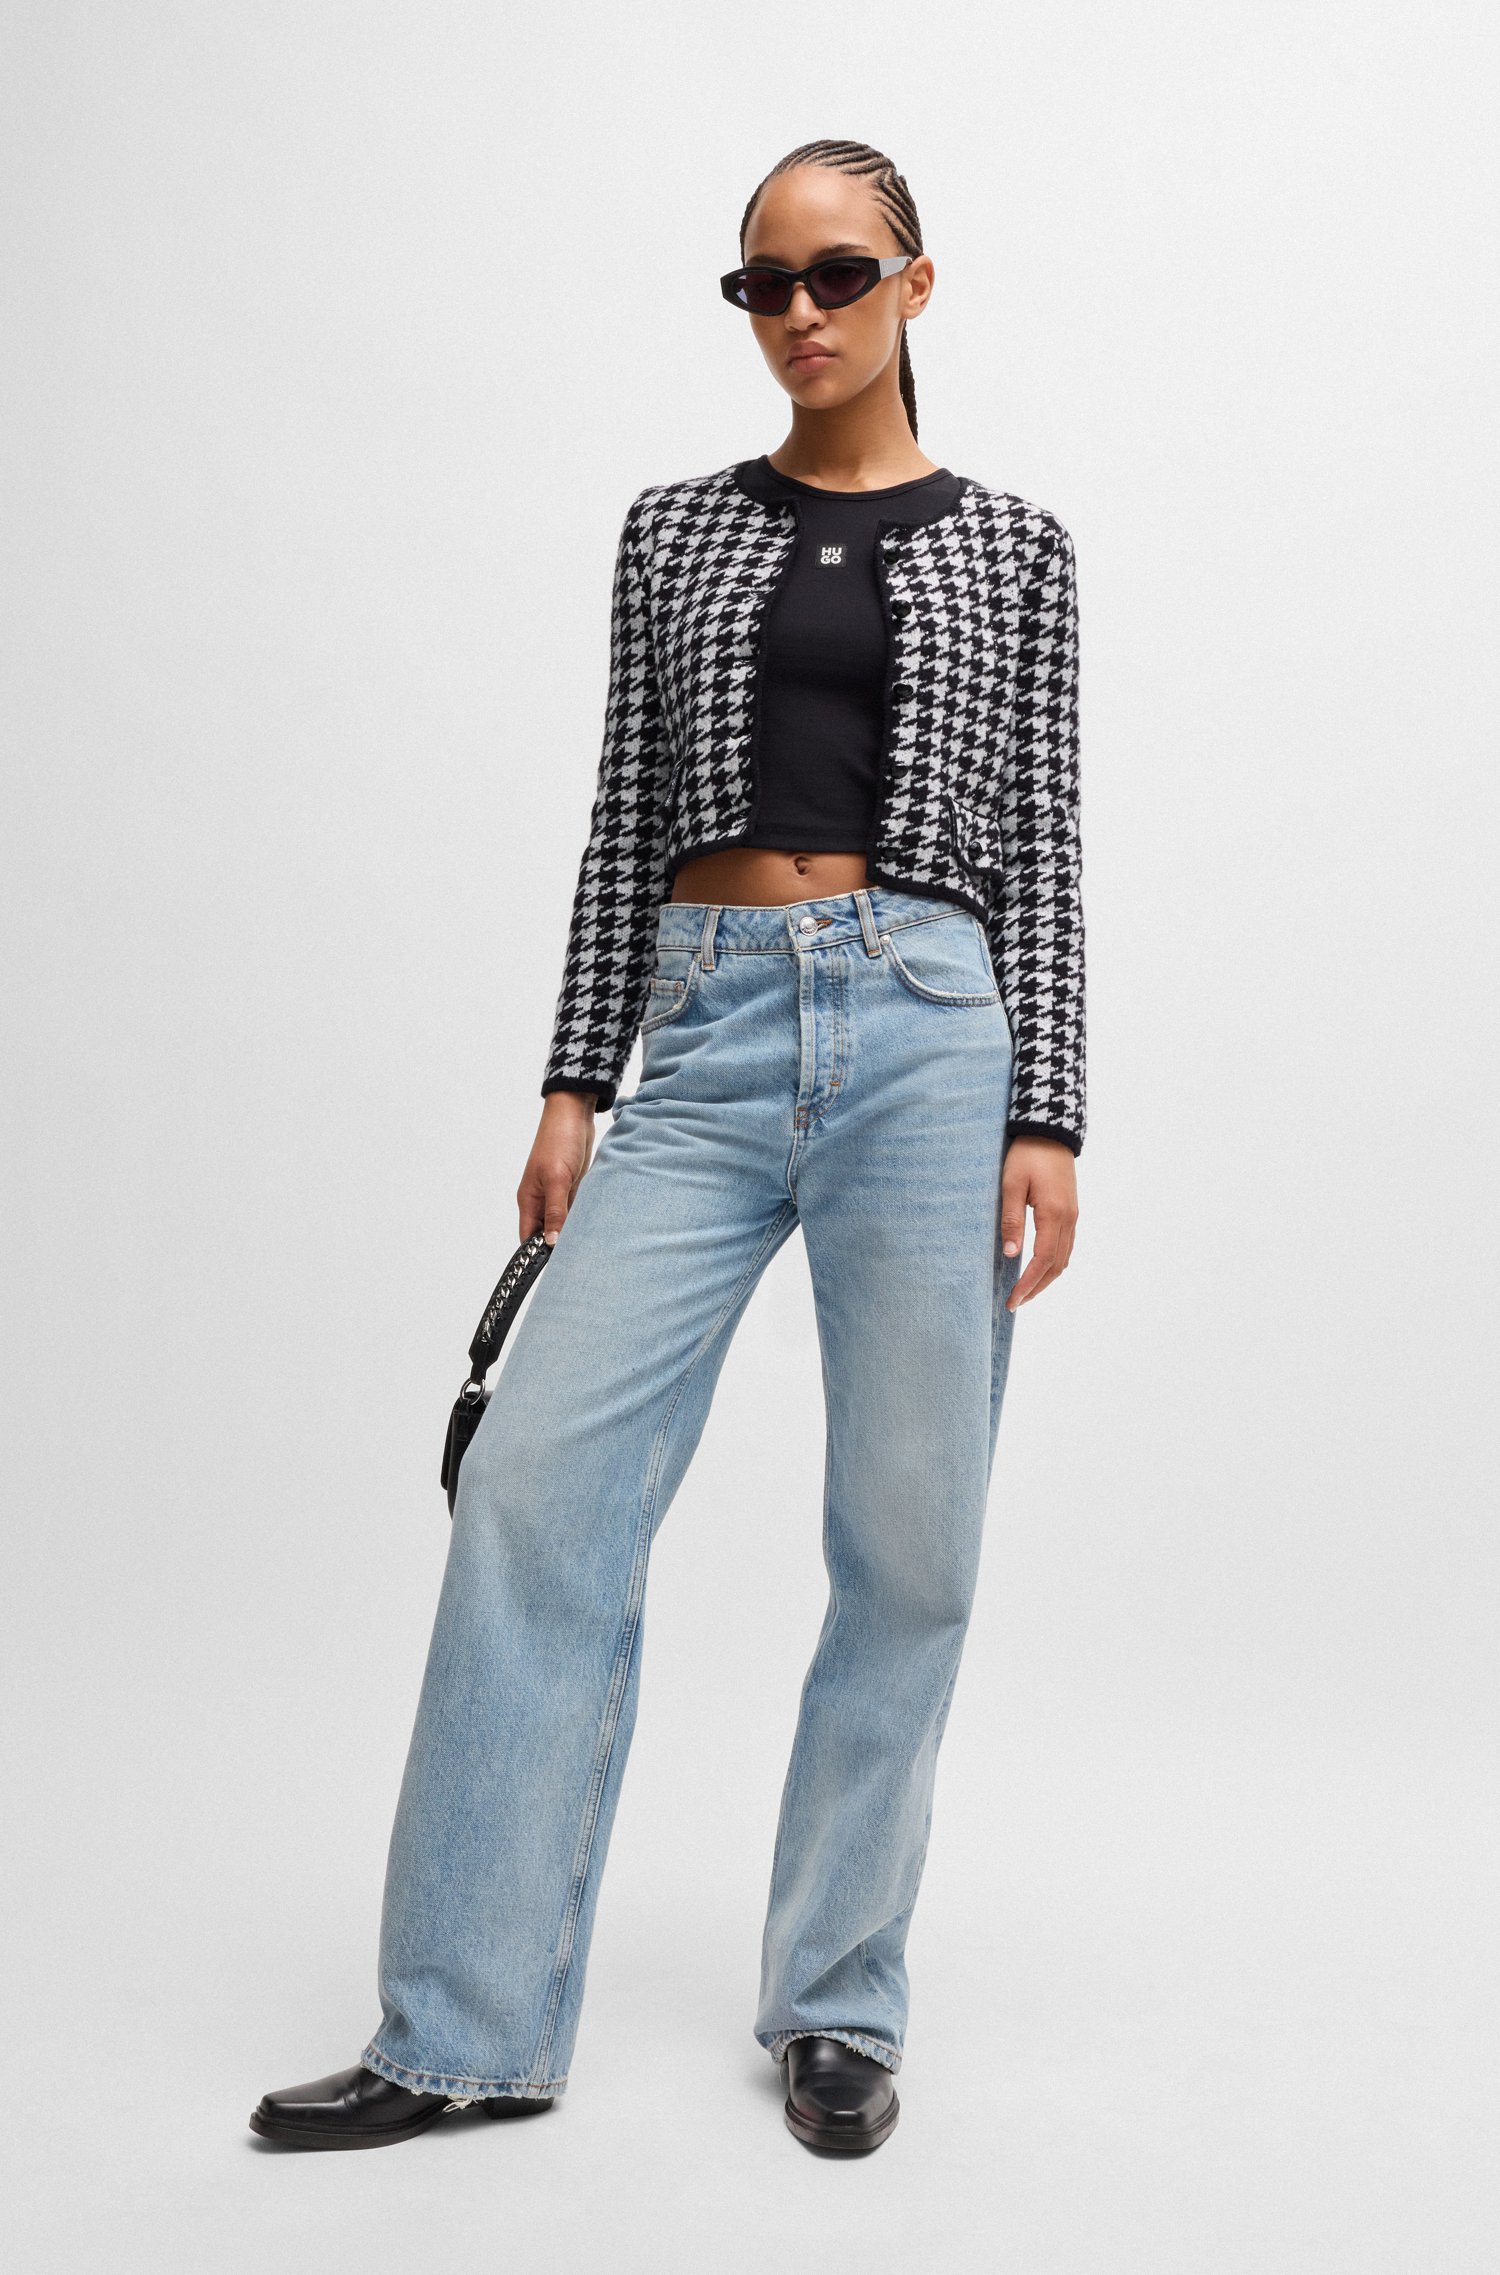 Cropped cardigan a houndstooth cotton blend